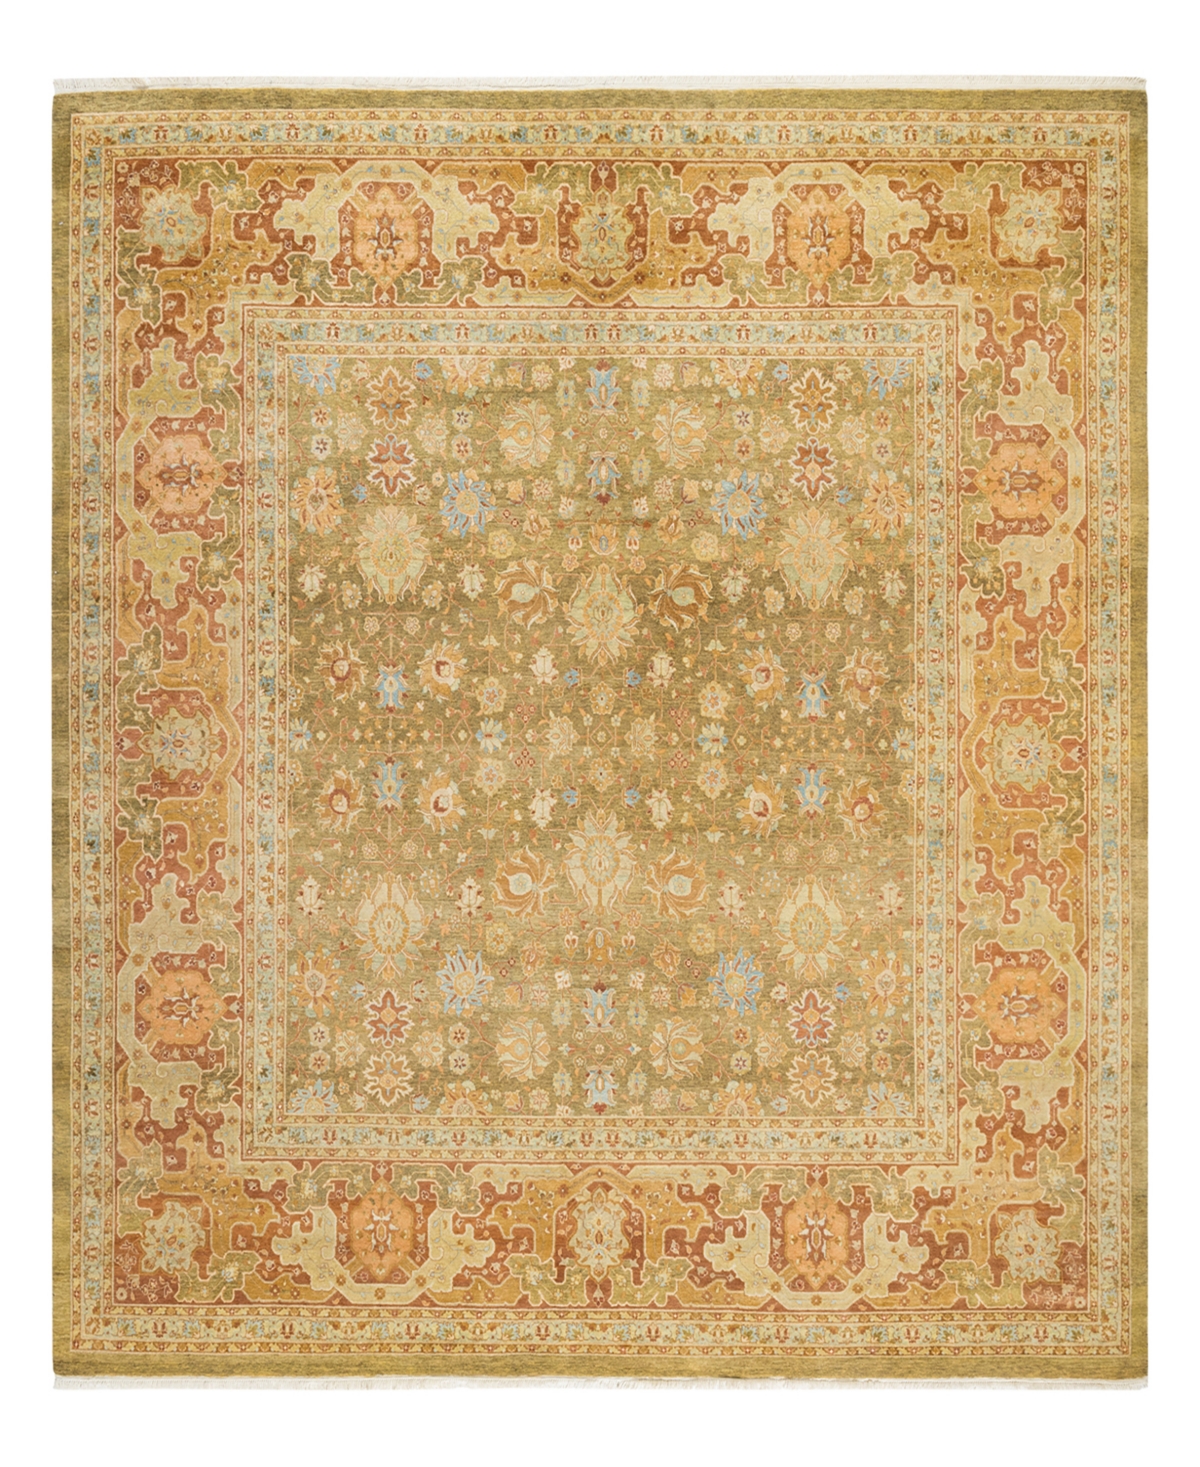 Adorn Hand Woven Rugs Mogul M1550 8'4in x 8'4in Square Area Rug - Tan